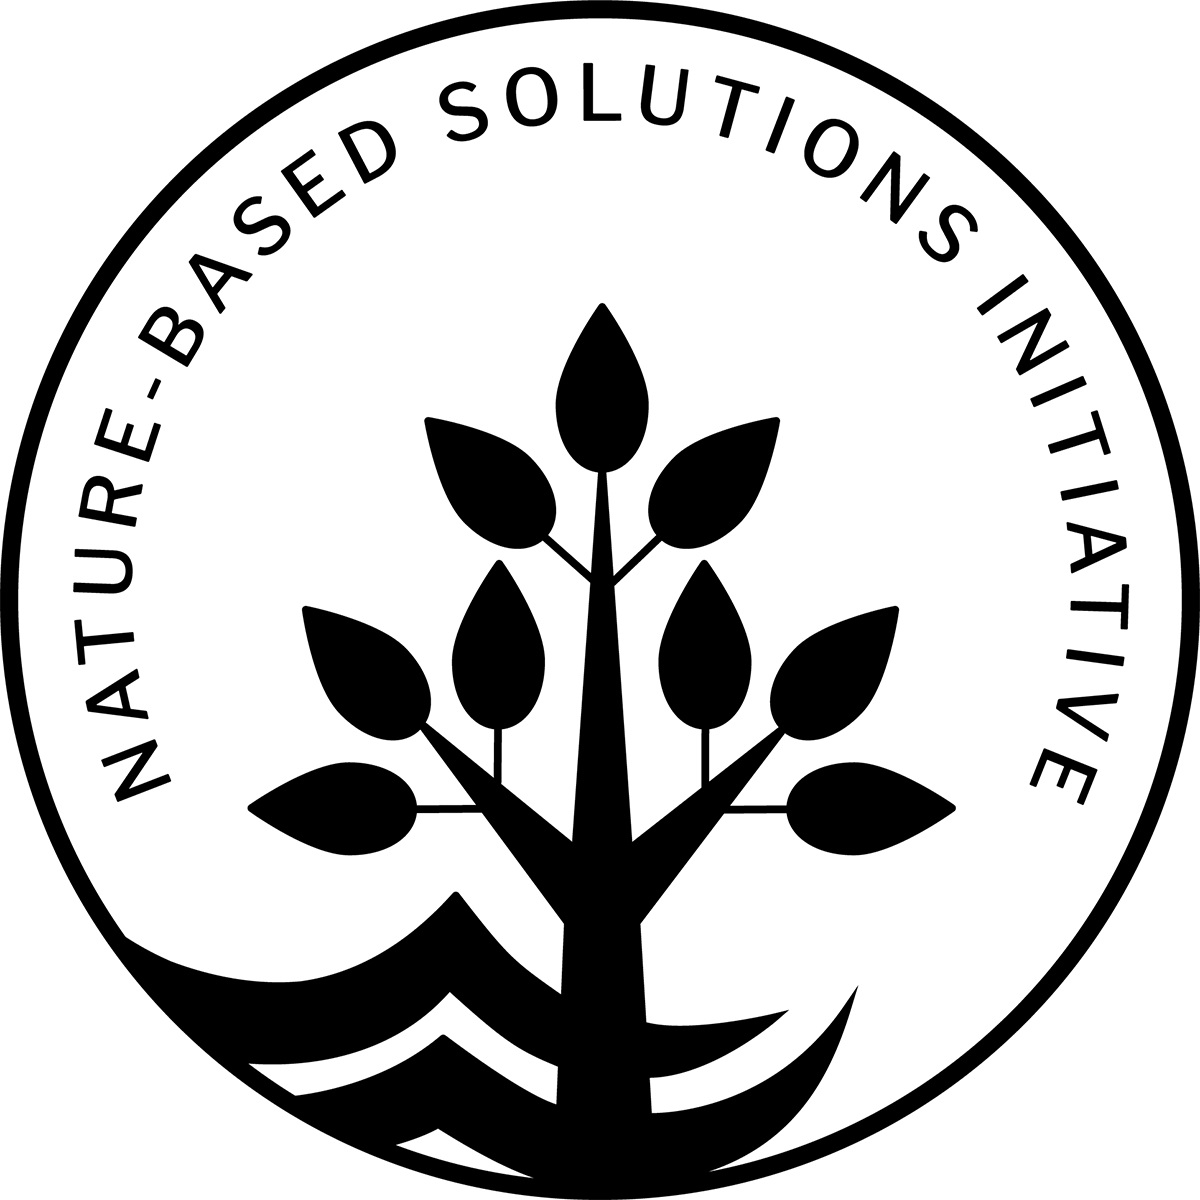 Nature Based Solutions to Global Challenges Foundation Course 1